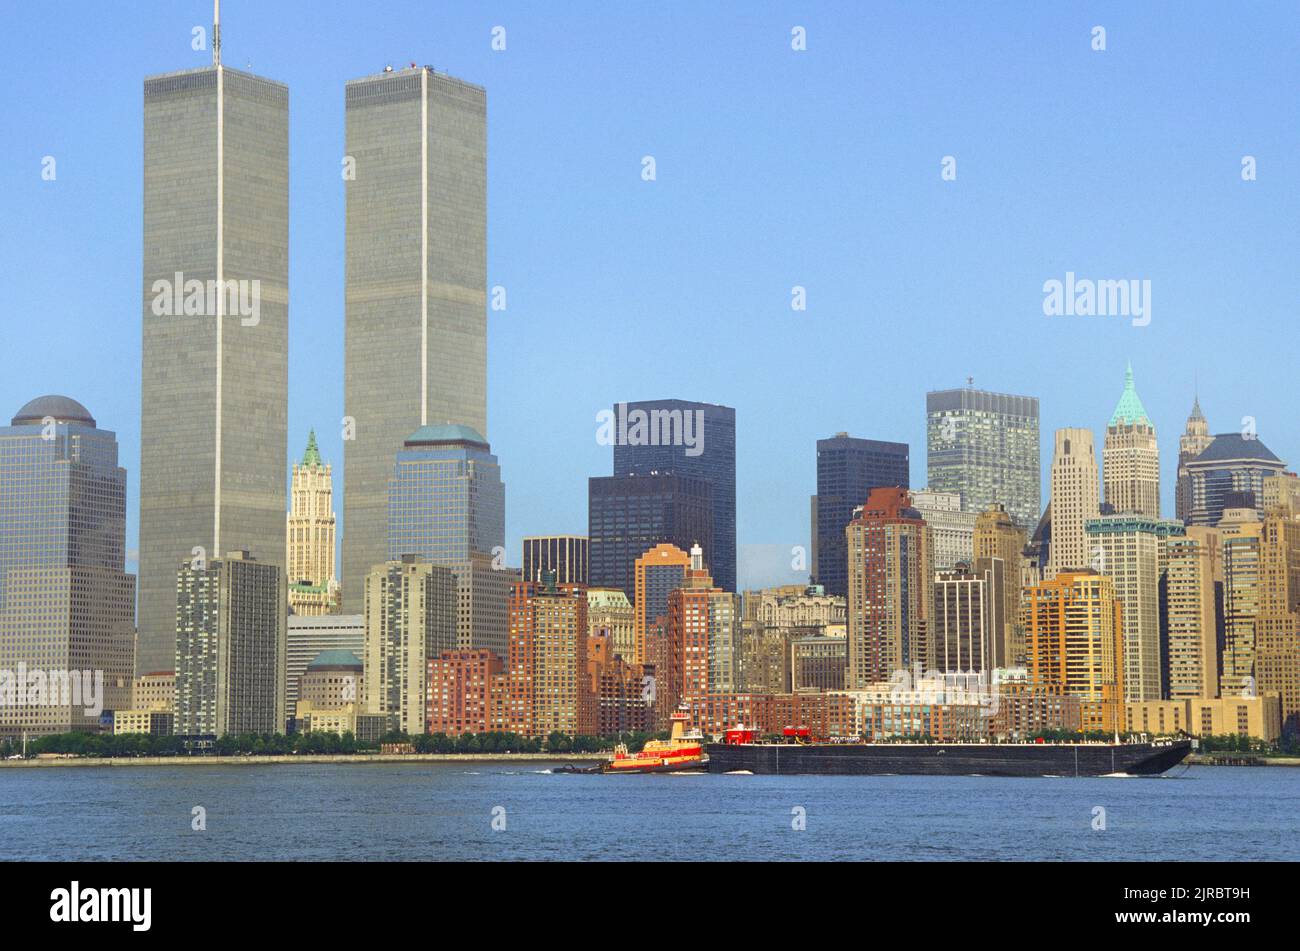 Twin Towers, World Trade Center before 9/11. View of Lower Manhattan skyscrapers in the Financial District and the Hudson River. Tugboat and scow Stock Photo